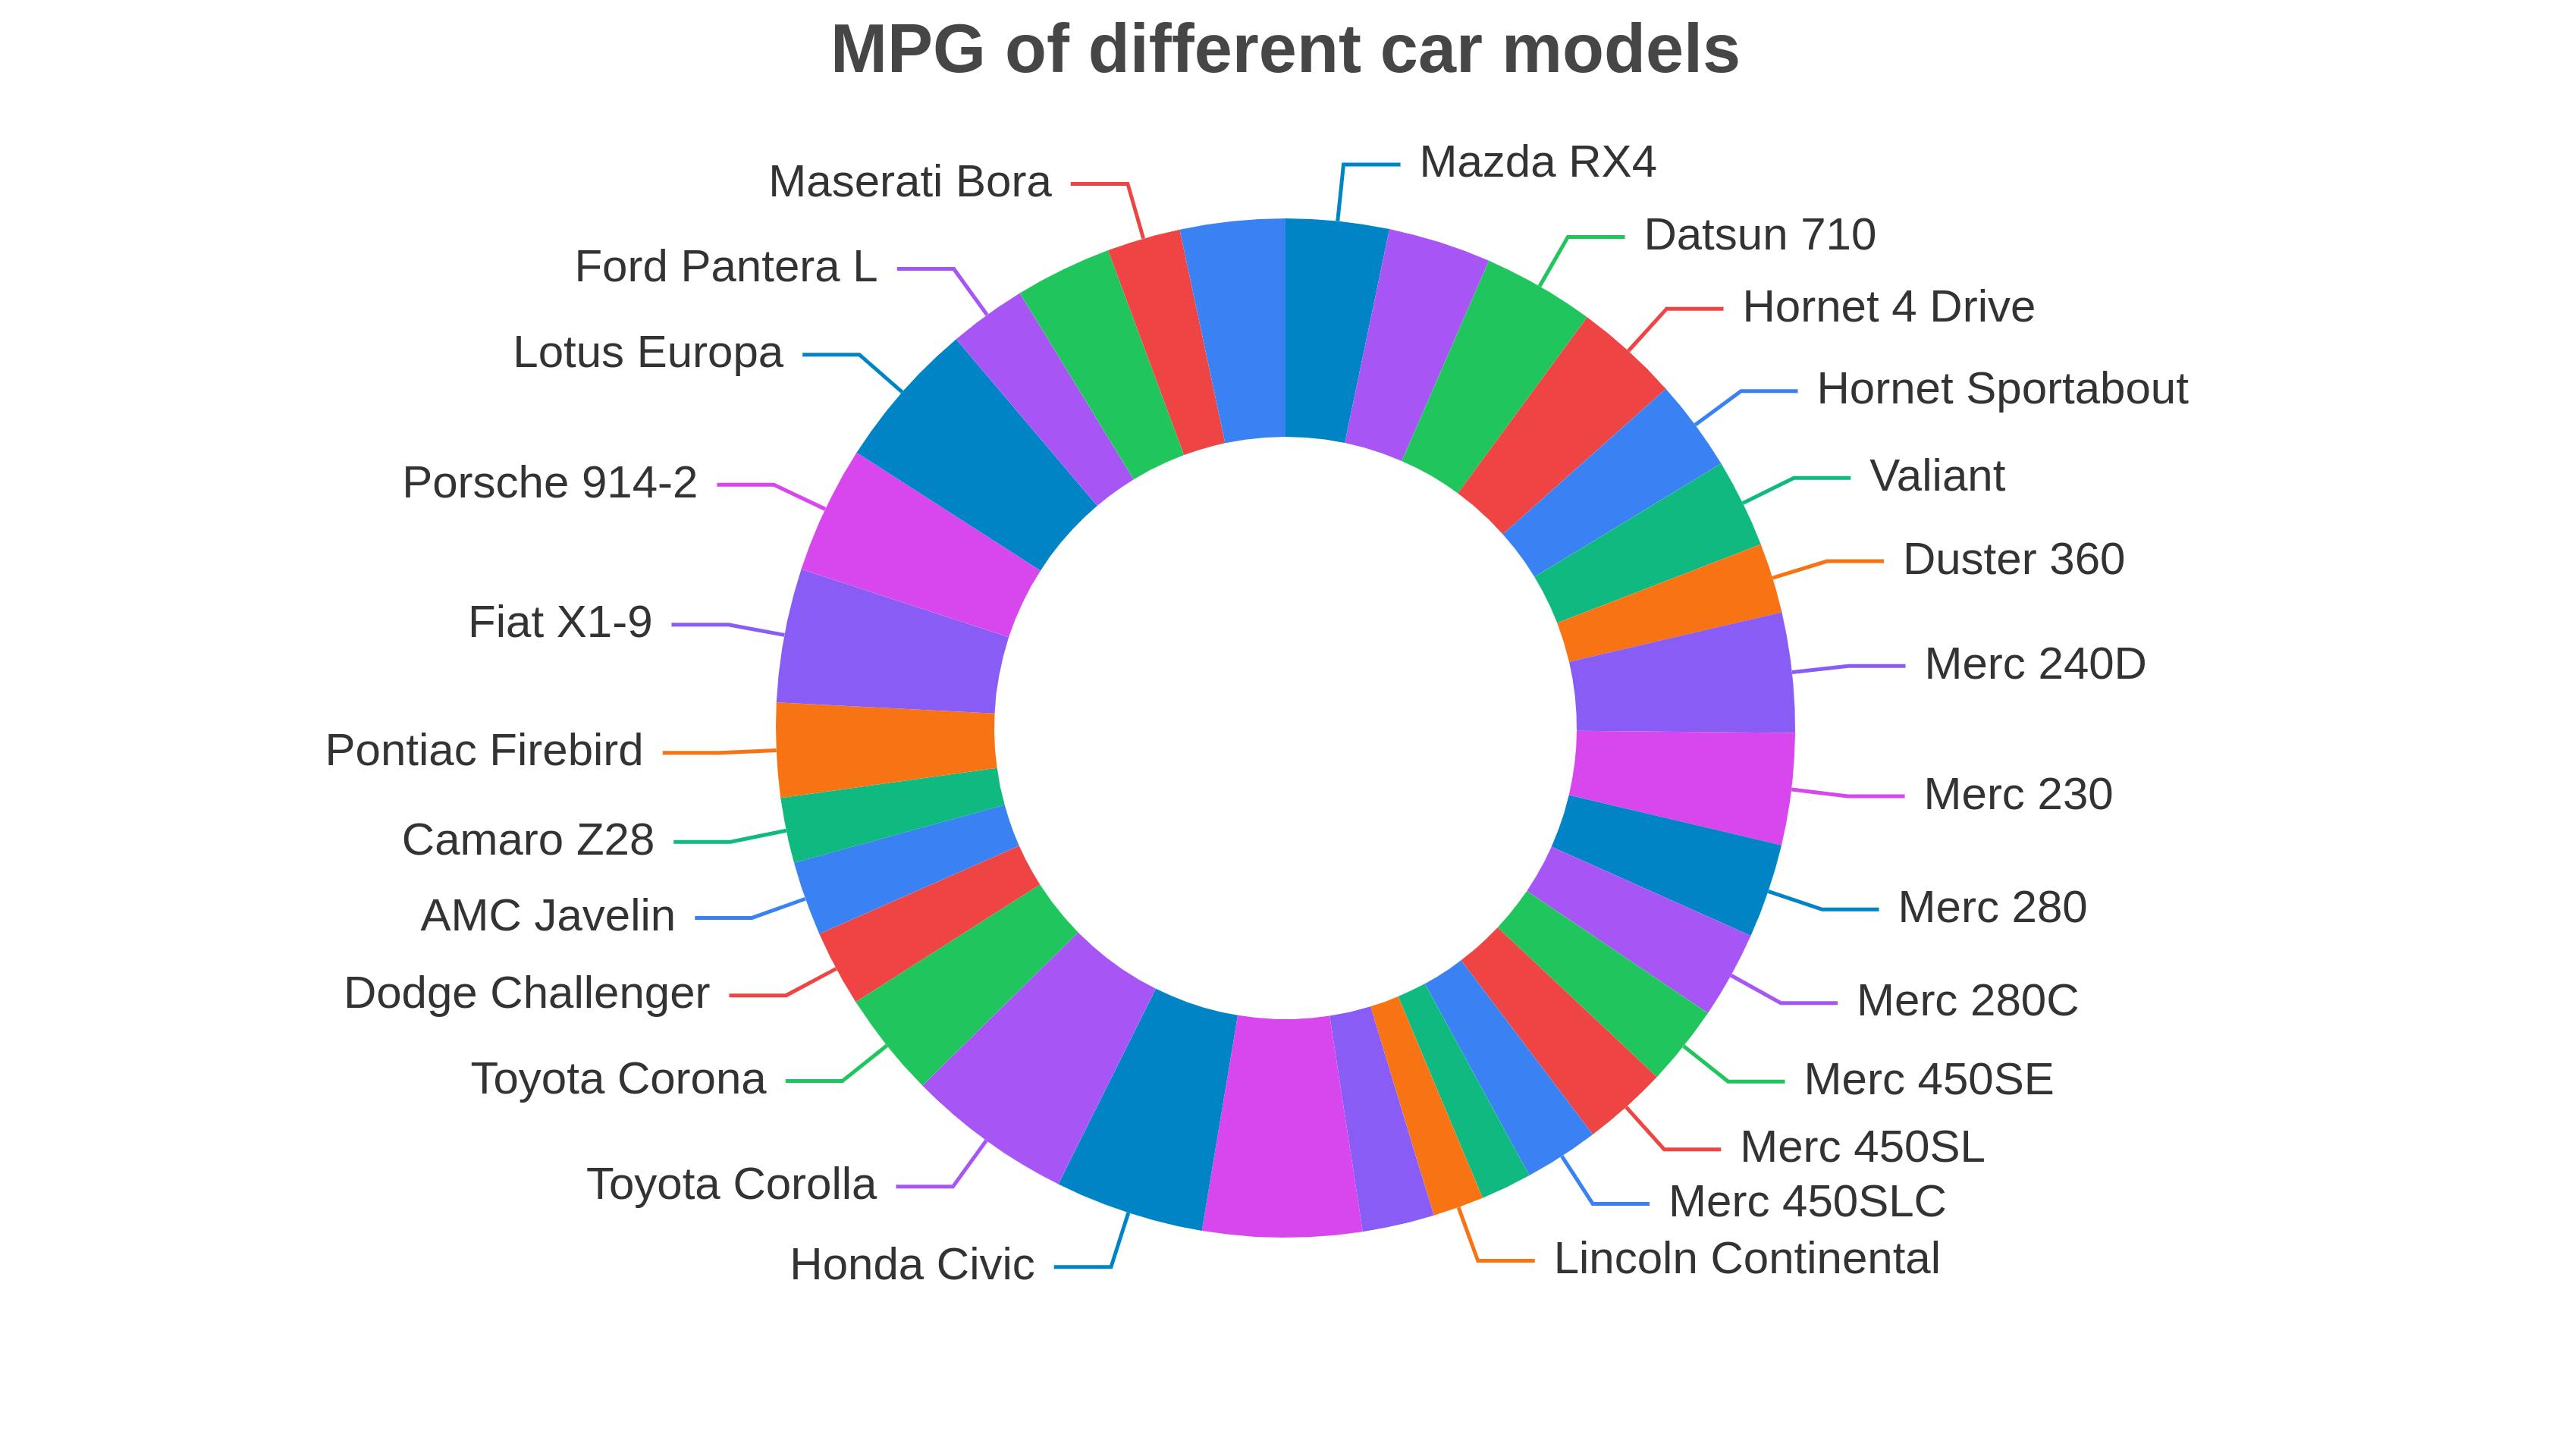 Donut chart showing mpg of different car models